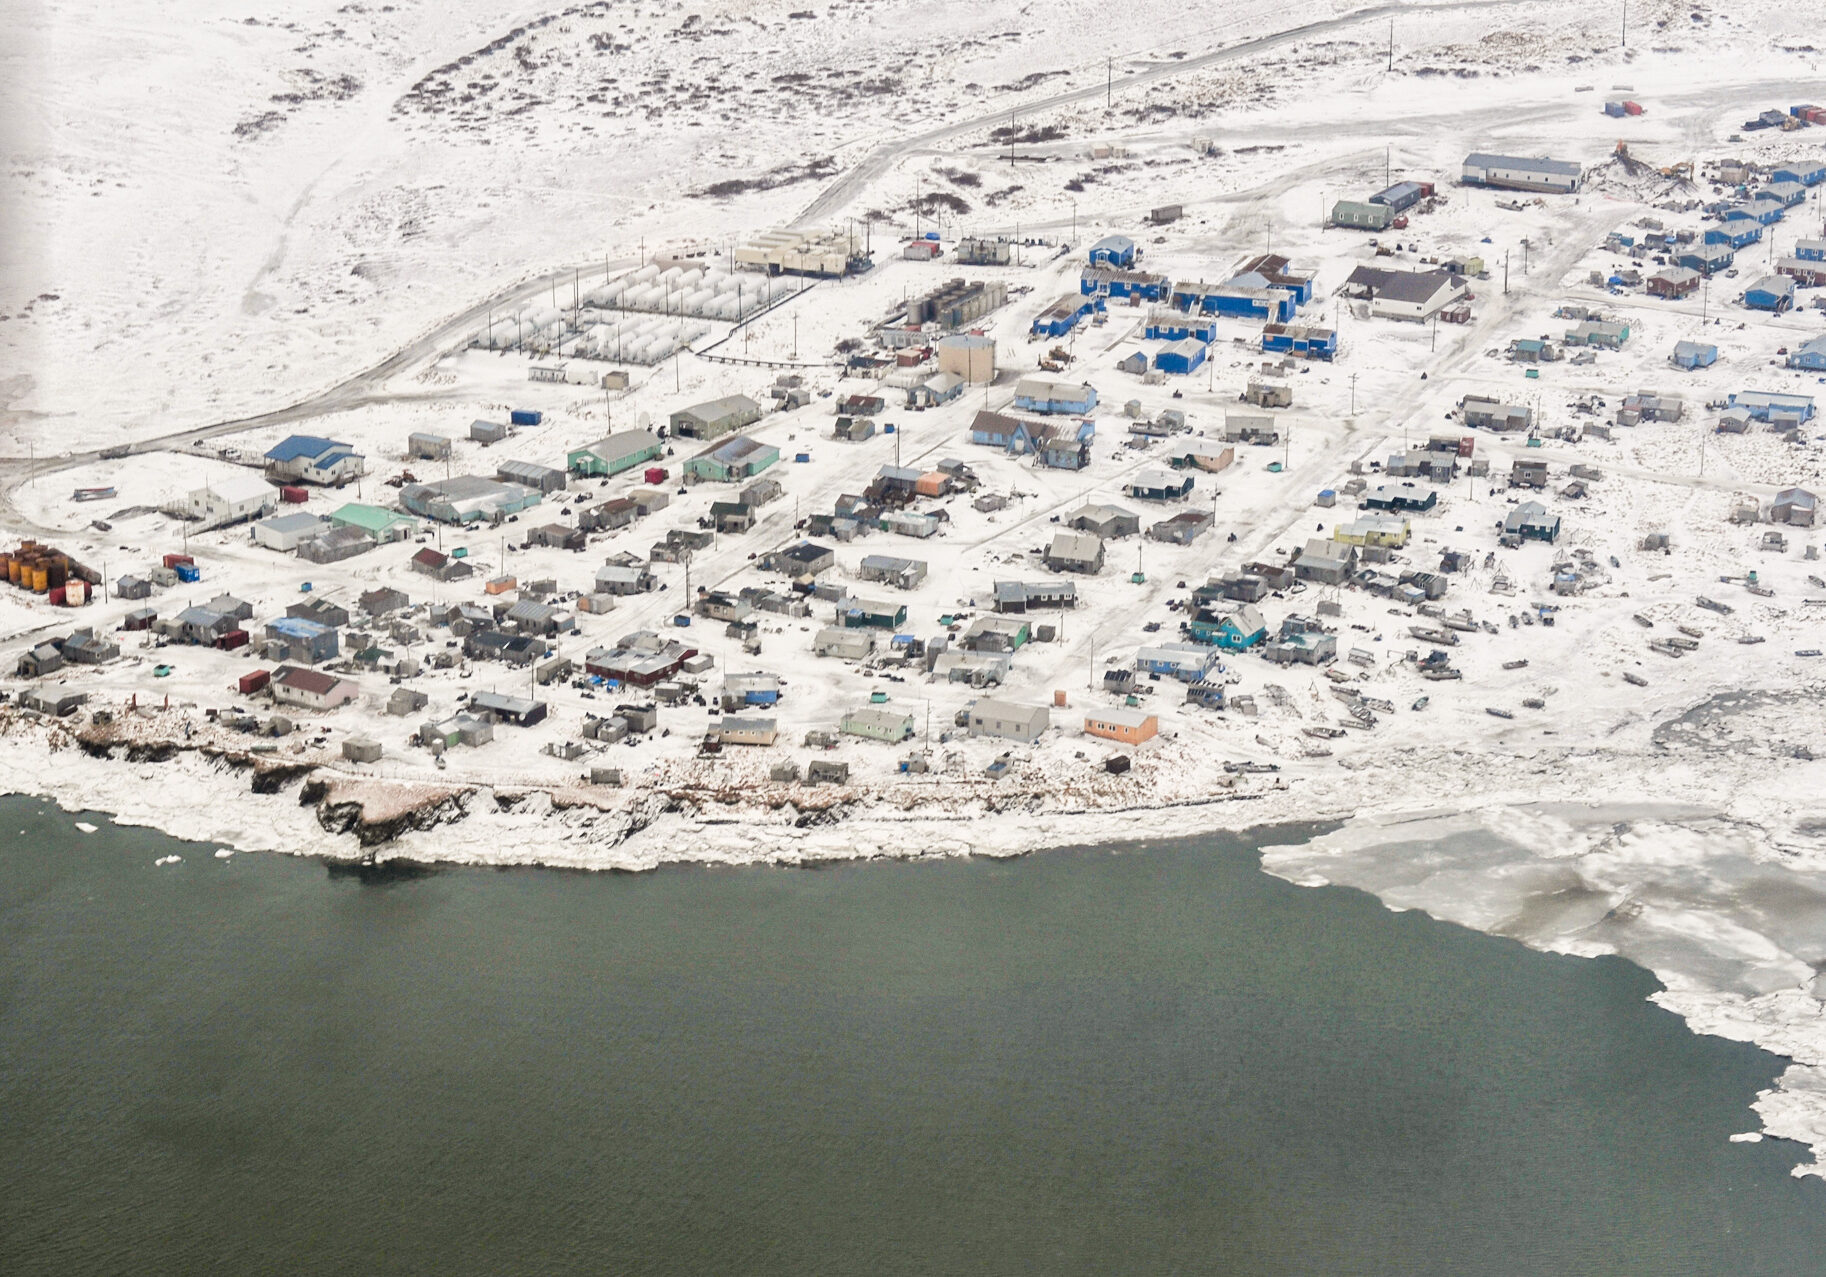 An aerial view over a snowy, coastal Alaska village in wintertime